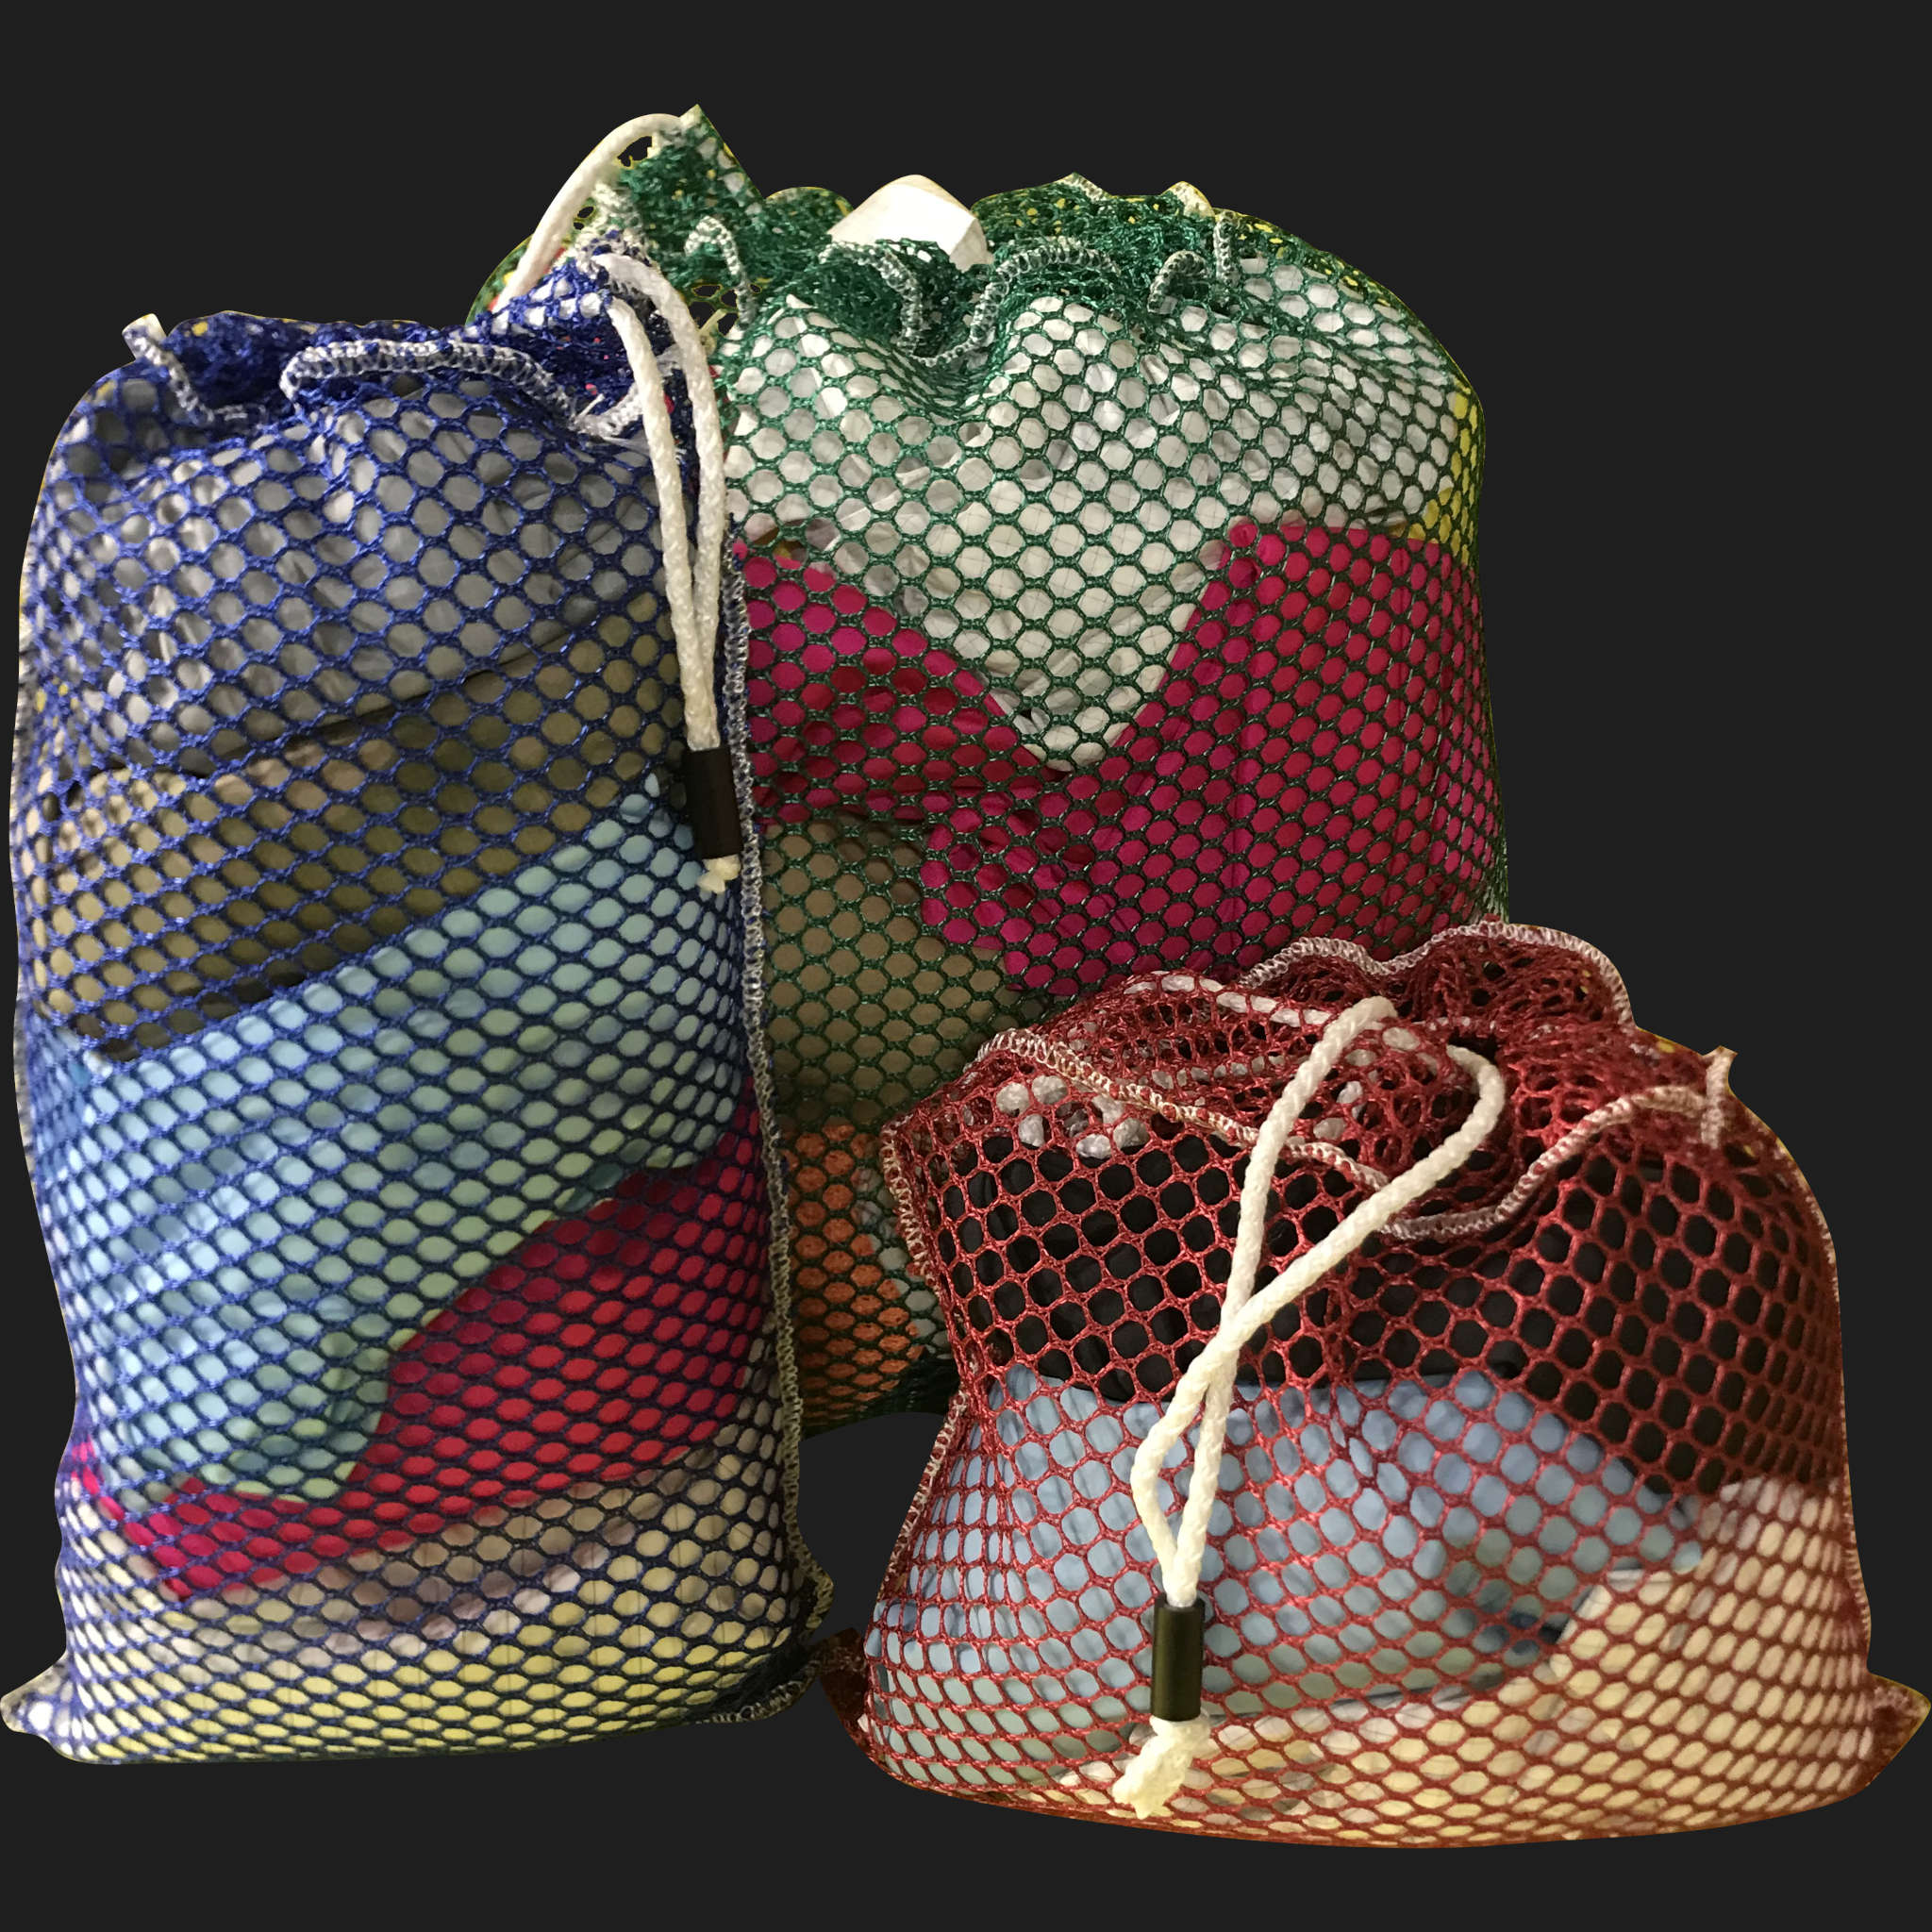 26" x 54" Customized Mesh-Net-Laundry Bags Heavy Duty with Cord and barrellock closure